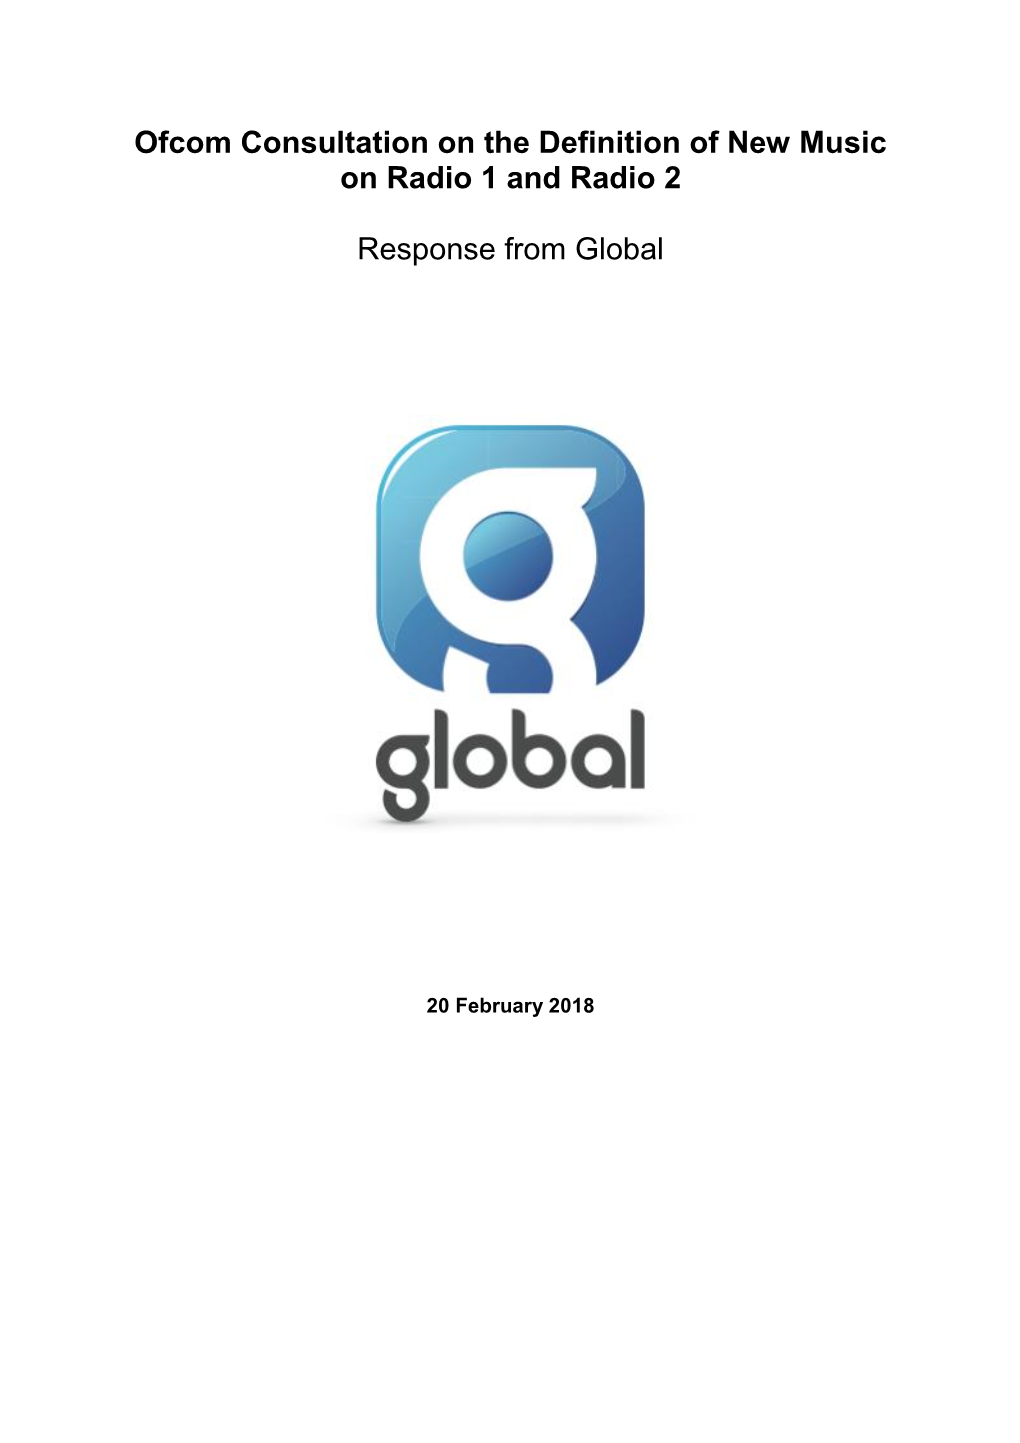 Global's Response to the New Music Consultation